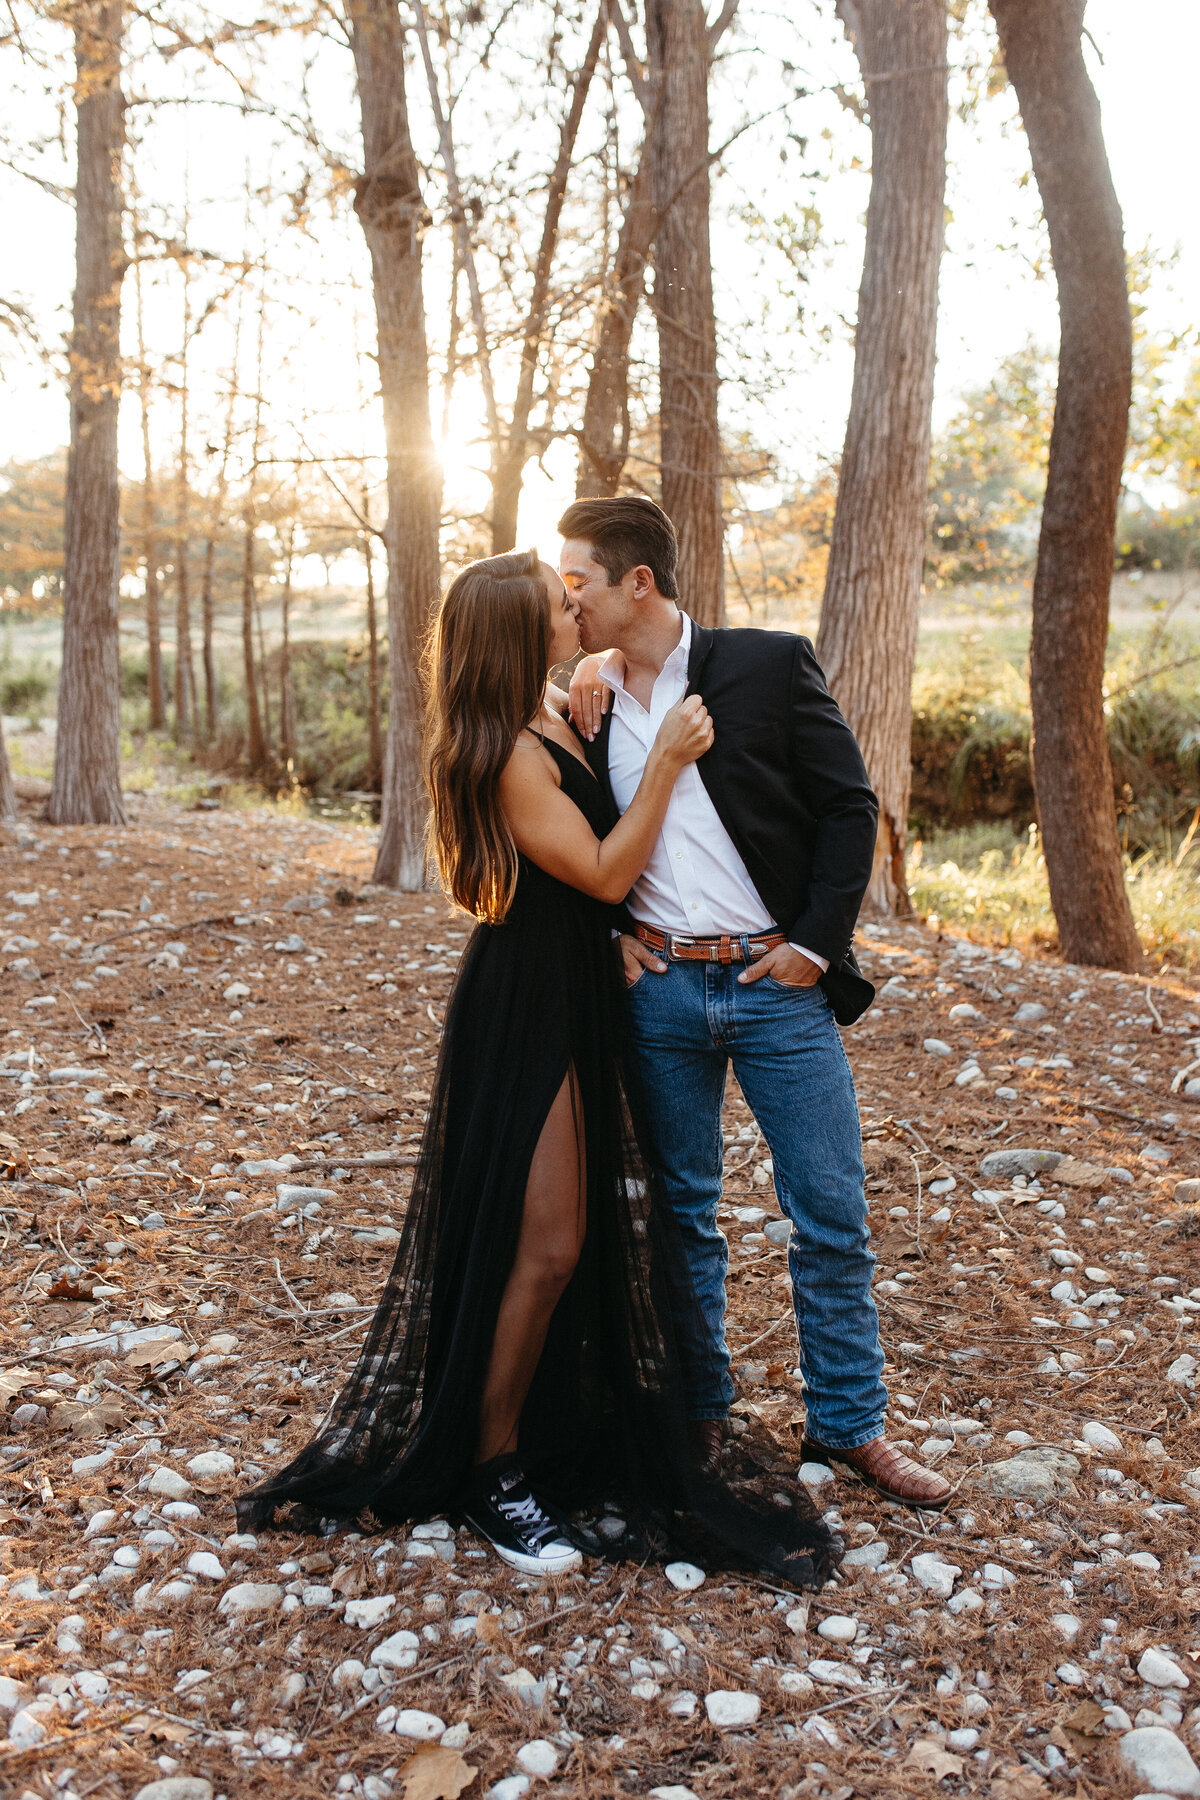 Hill-country-engagement-session-leah-thomason-1